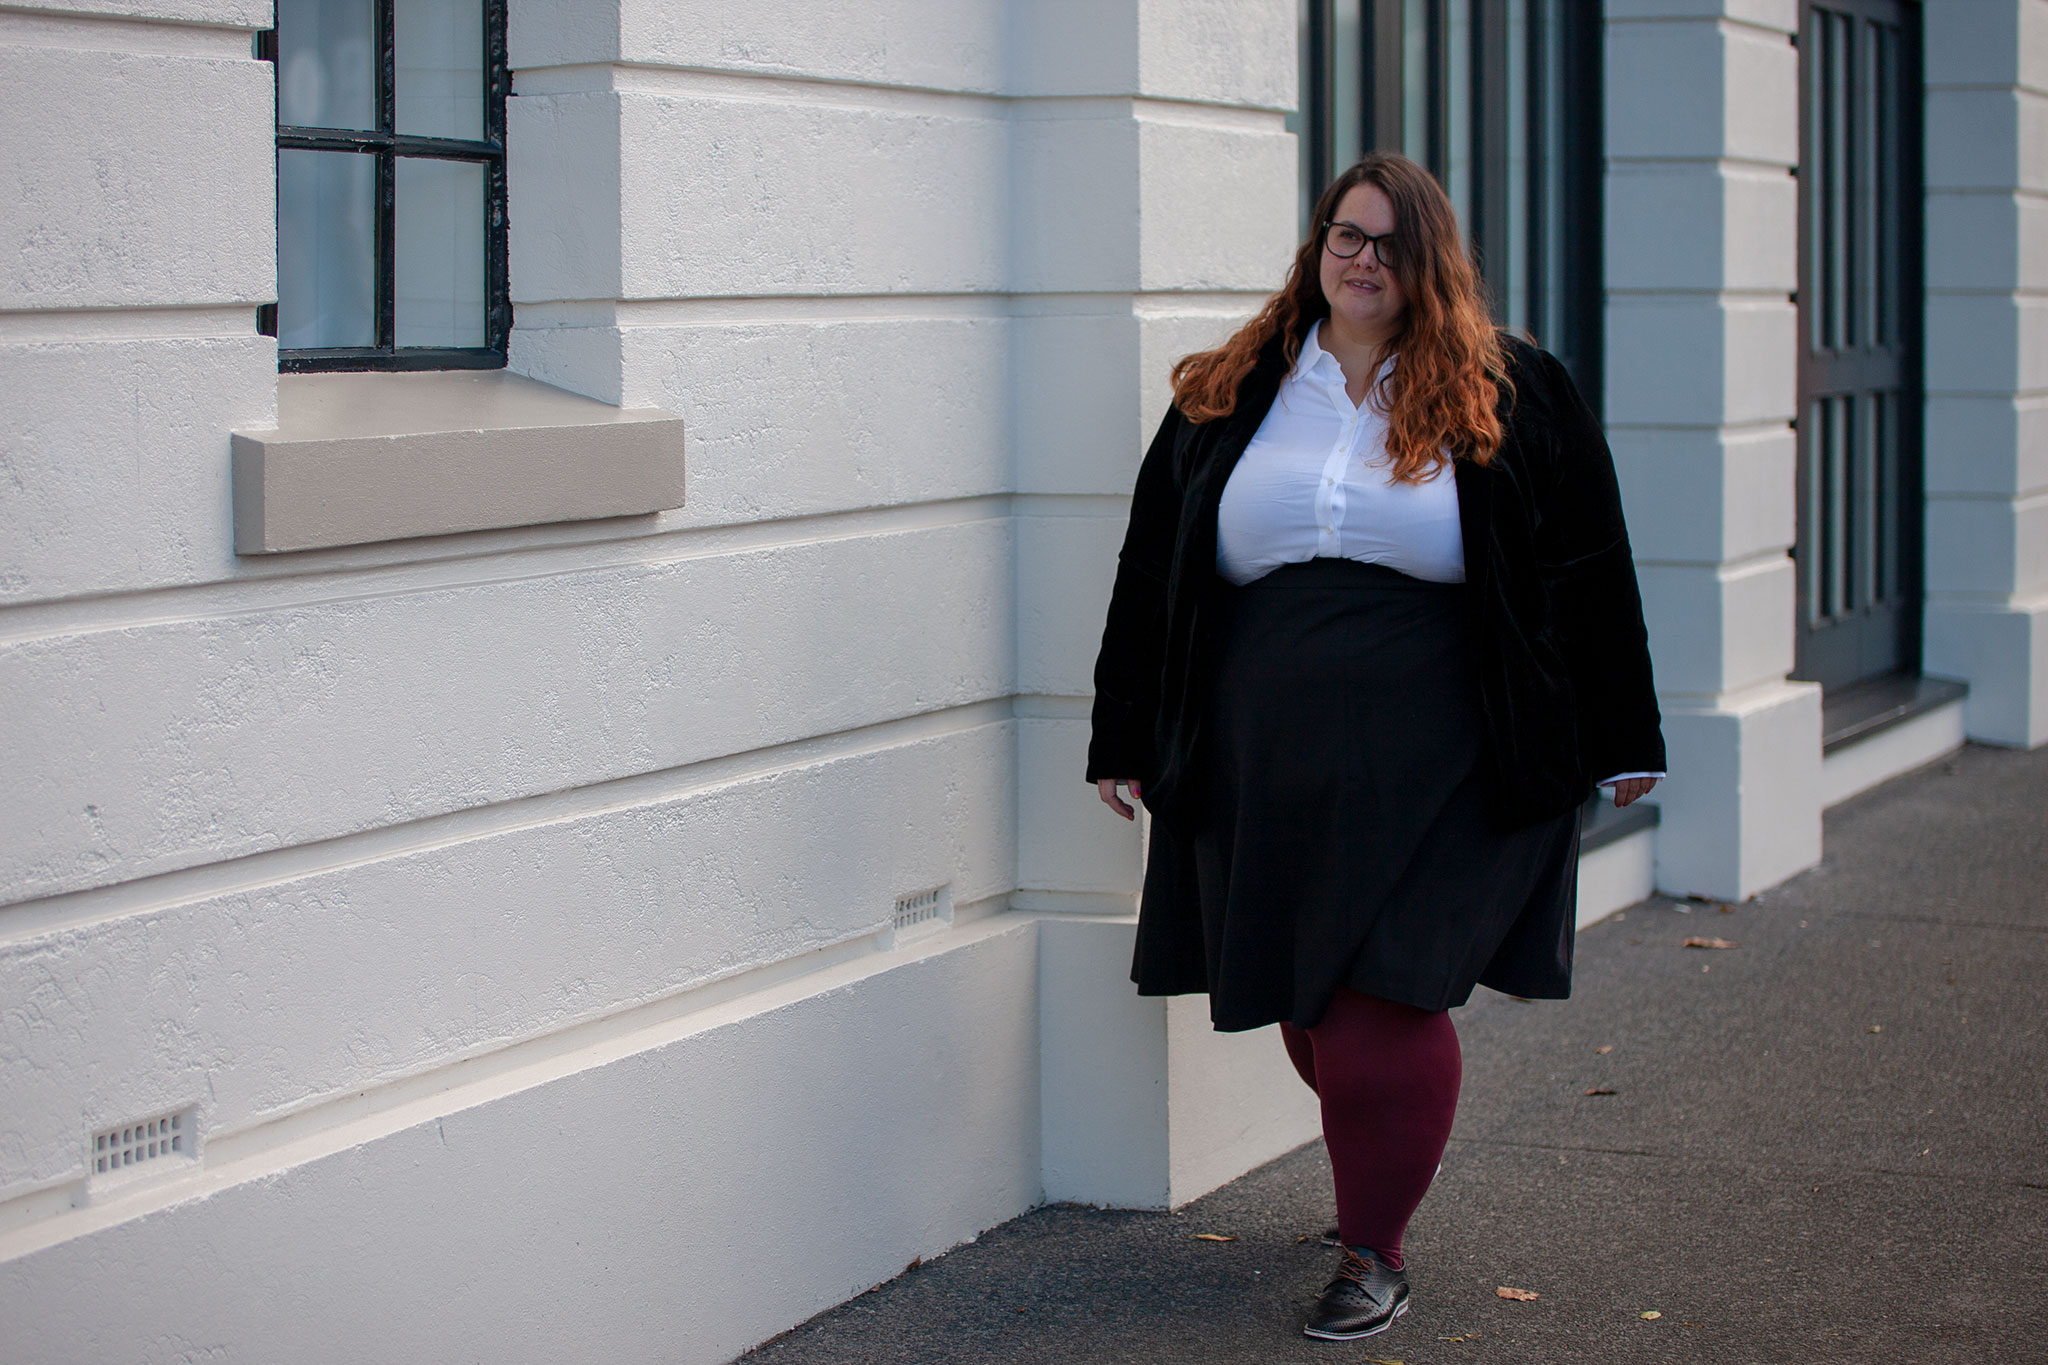 New Zealand plus size blogger Meagan Kerr wears 17 Sundays Basic Longline White Button Up Shirt, Lane Bryant Ponte Circle Skirt, Sara Velvet Blazer from Ezibuy, Pamela Mann 90 Denier Maxi Opaque Plus Size Tights from The Tight Spot, Emerge Anaheim Cut-out Lace Up Court Flat from Ezibuy, Alexa Glasses from Specsavers. Photo by Doug Peters / Ambient Light